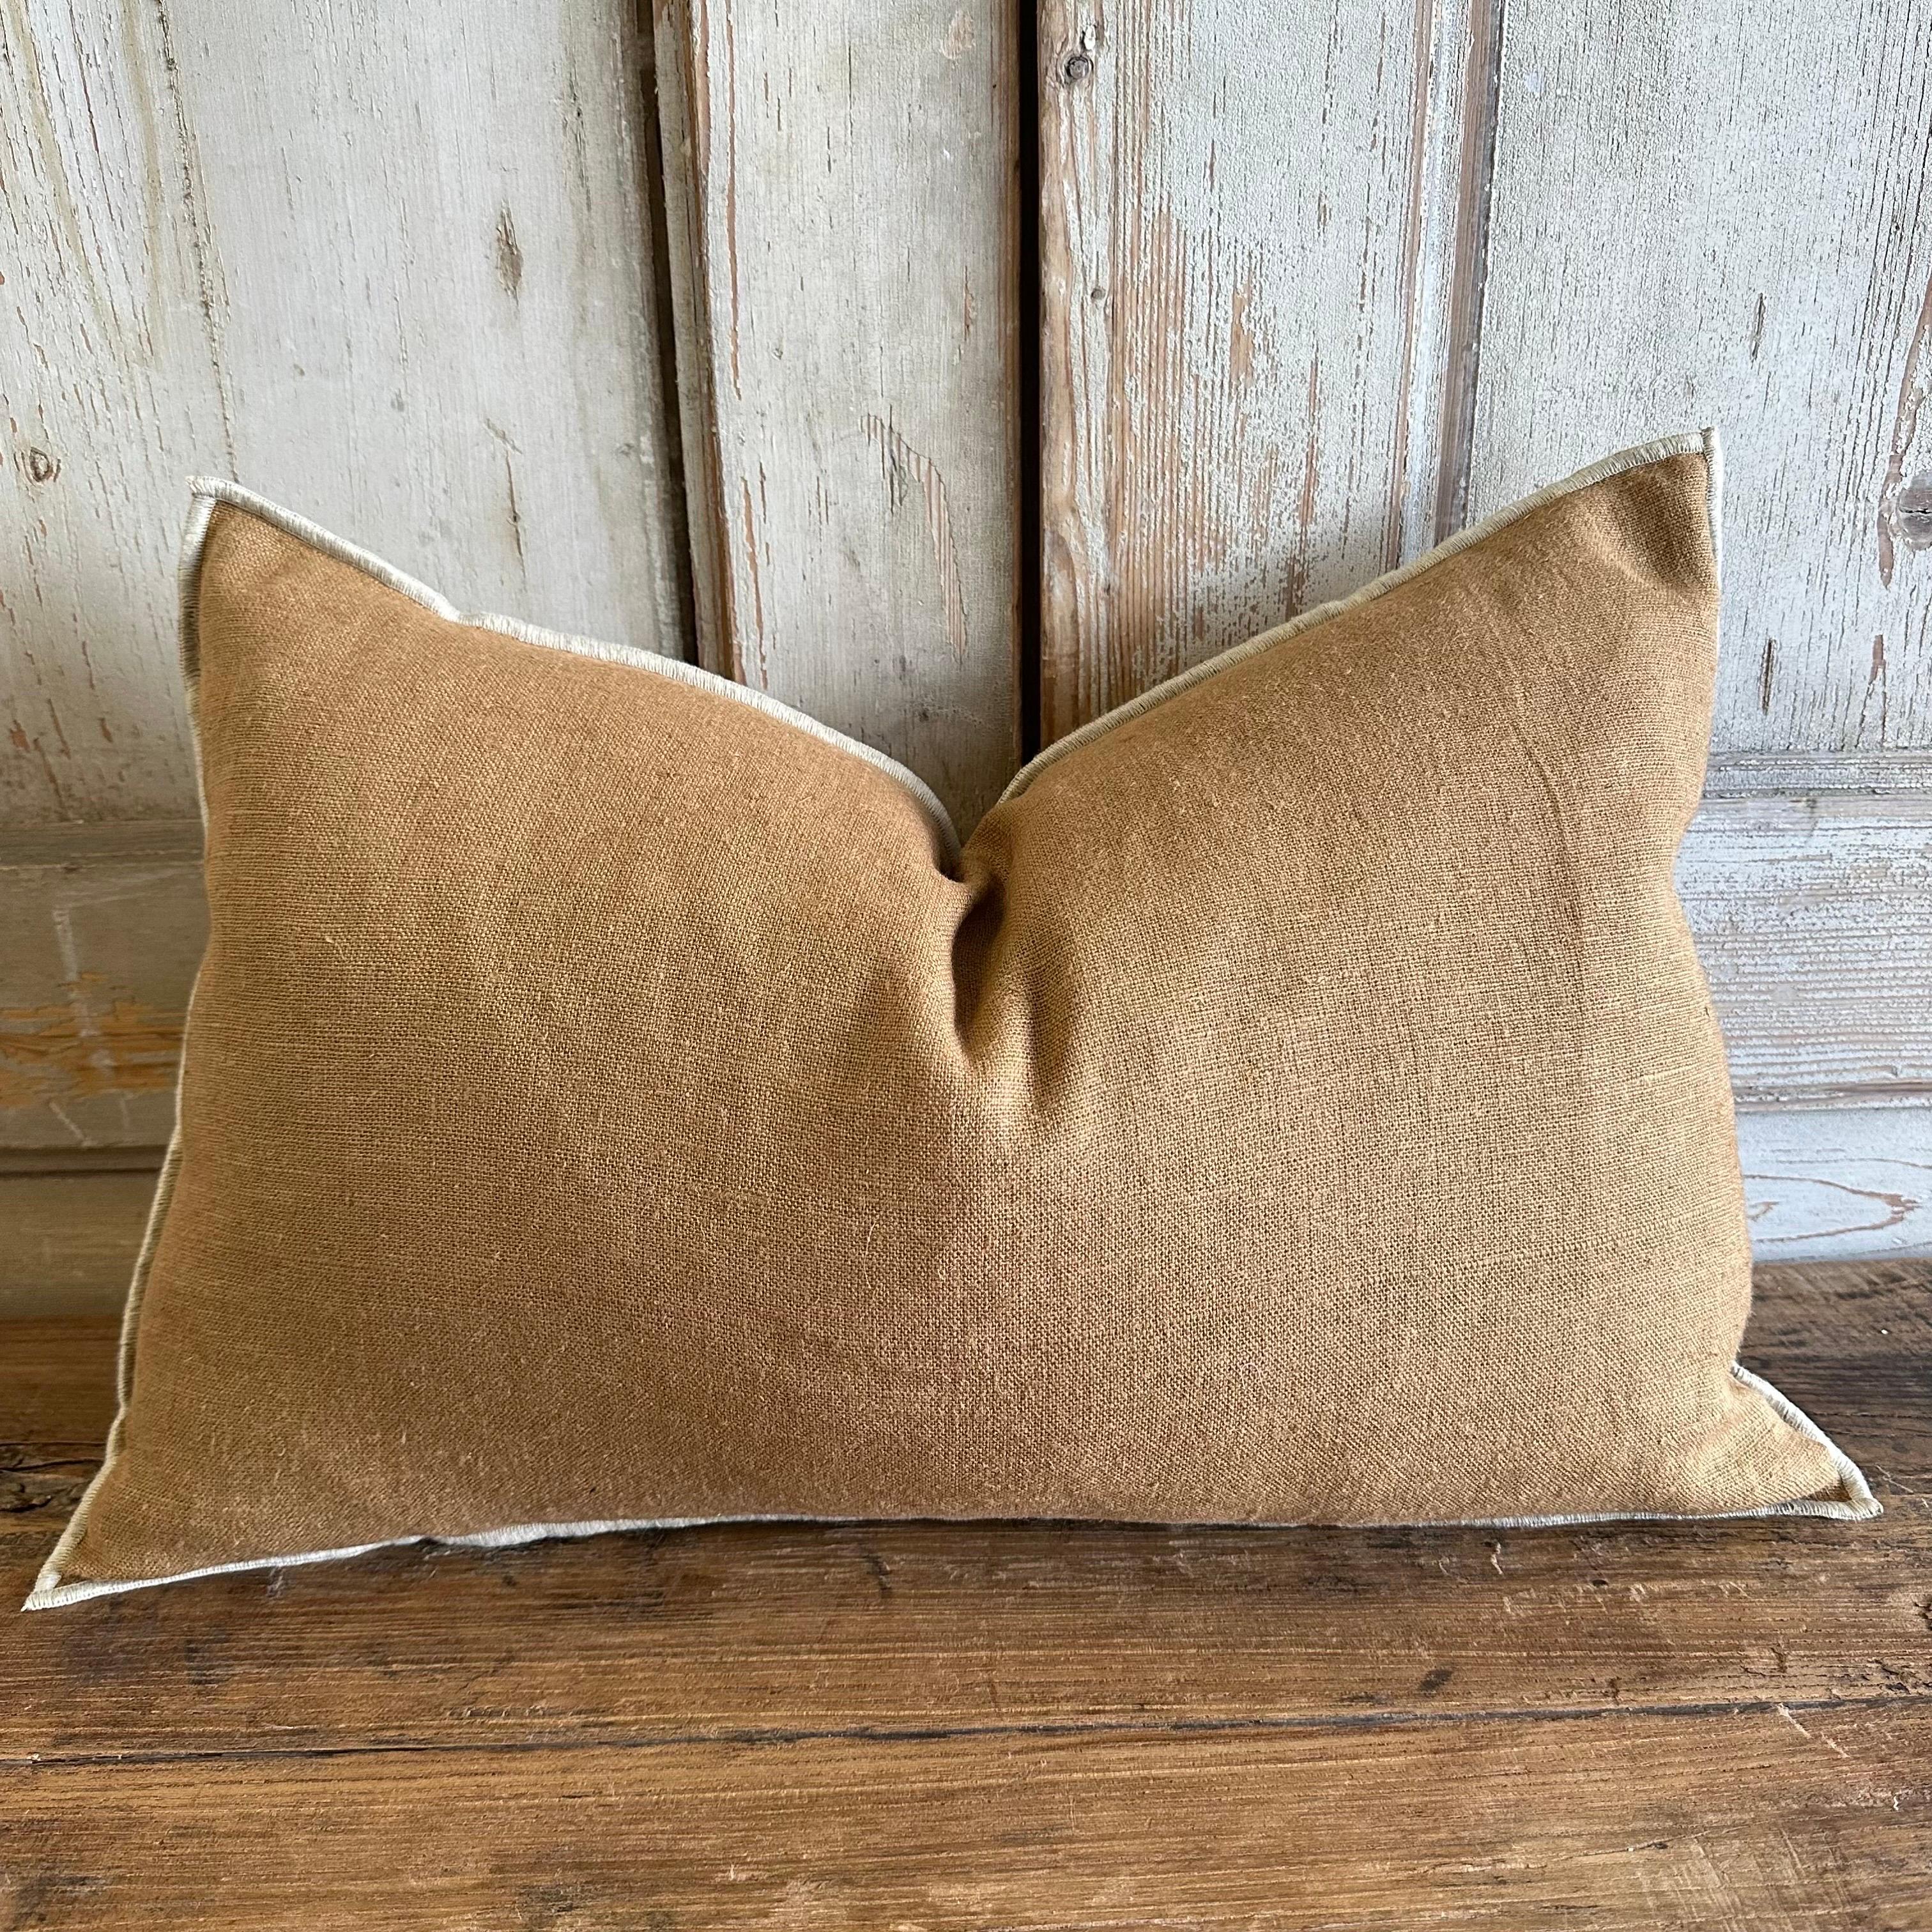 A beautiful 100% linen pillow with decorative stitched edge. 
Zipper closure, 90/10 down feather pillow is included.
Size: 16 x 24.
Color: TABAC, a brown terracota color
Composition
100% linen, natural finish, european flax label
A beautiful